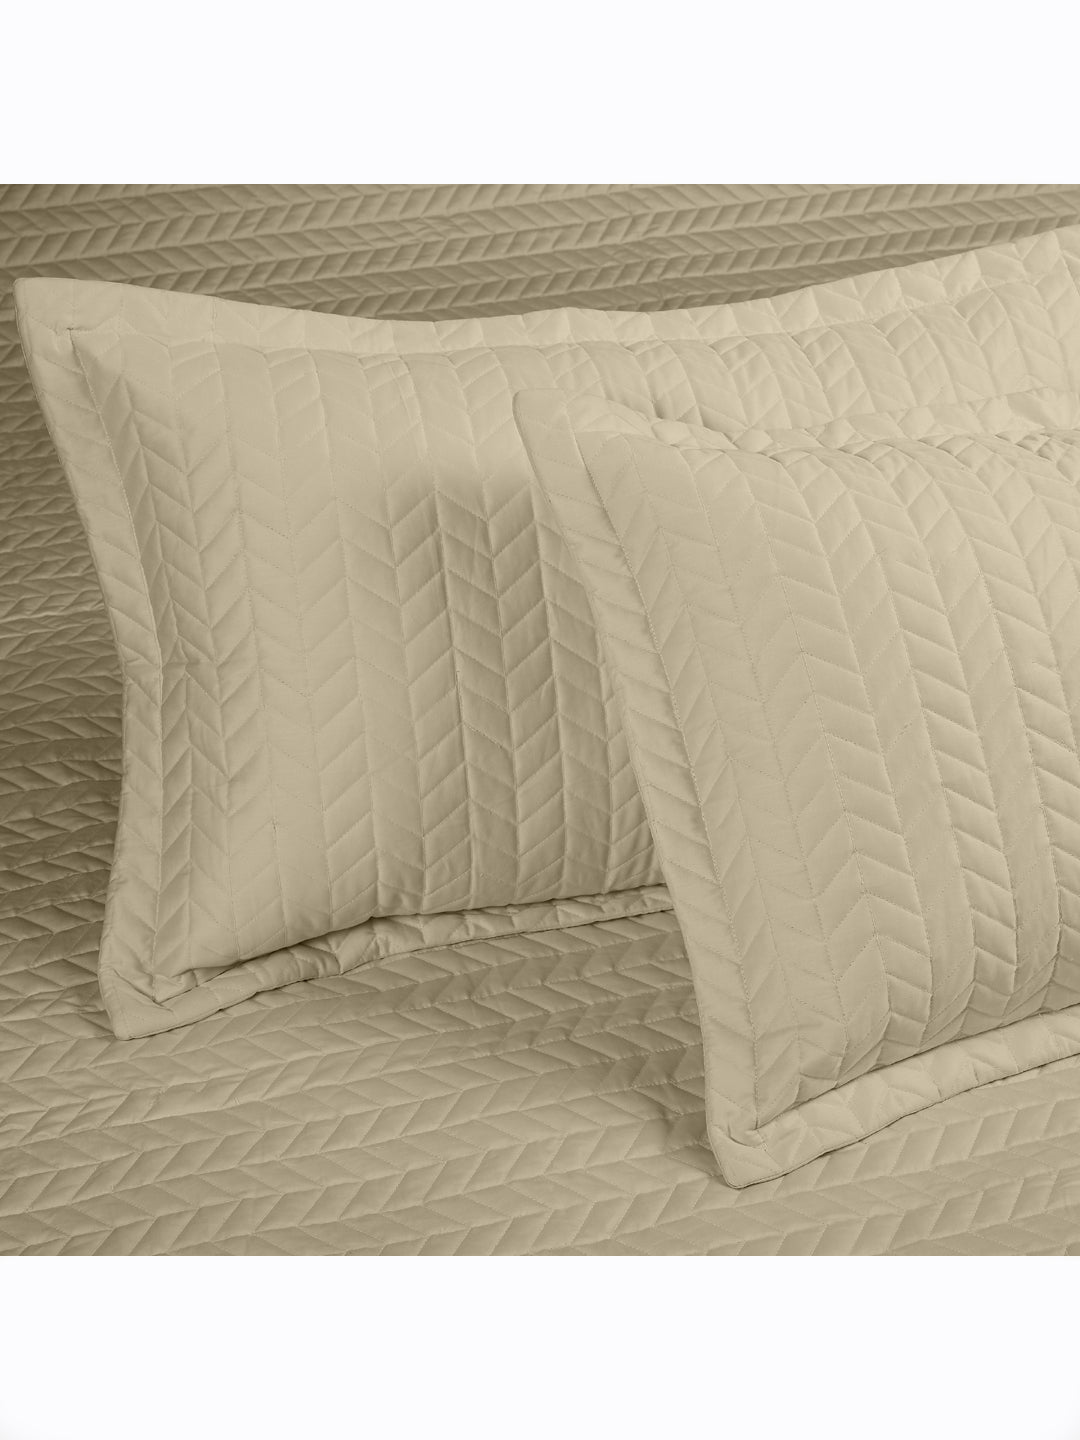 MARK HOME Quilted Bed Cover Khaki made from 100% Organic Cotton Sateen Fabric 400 TC with 150 GSM Wading between the fabric